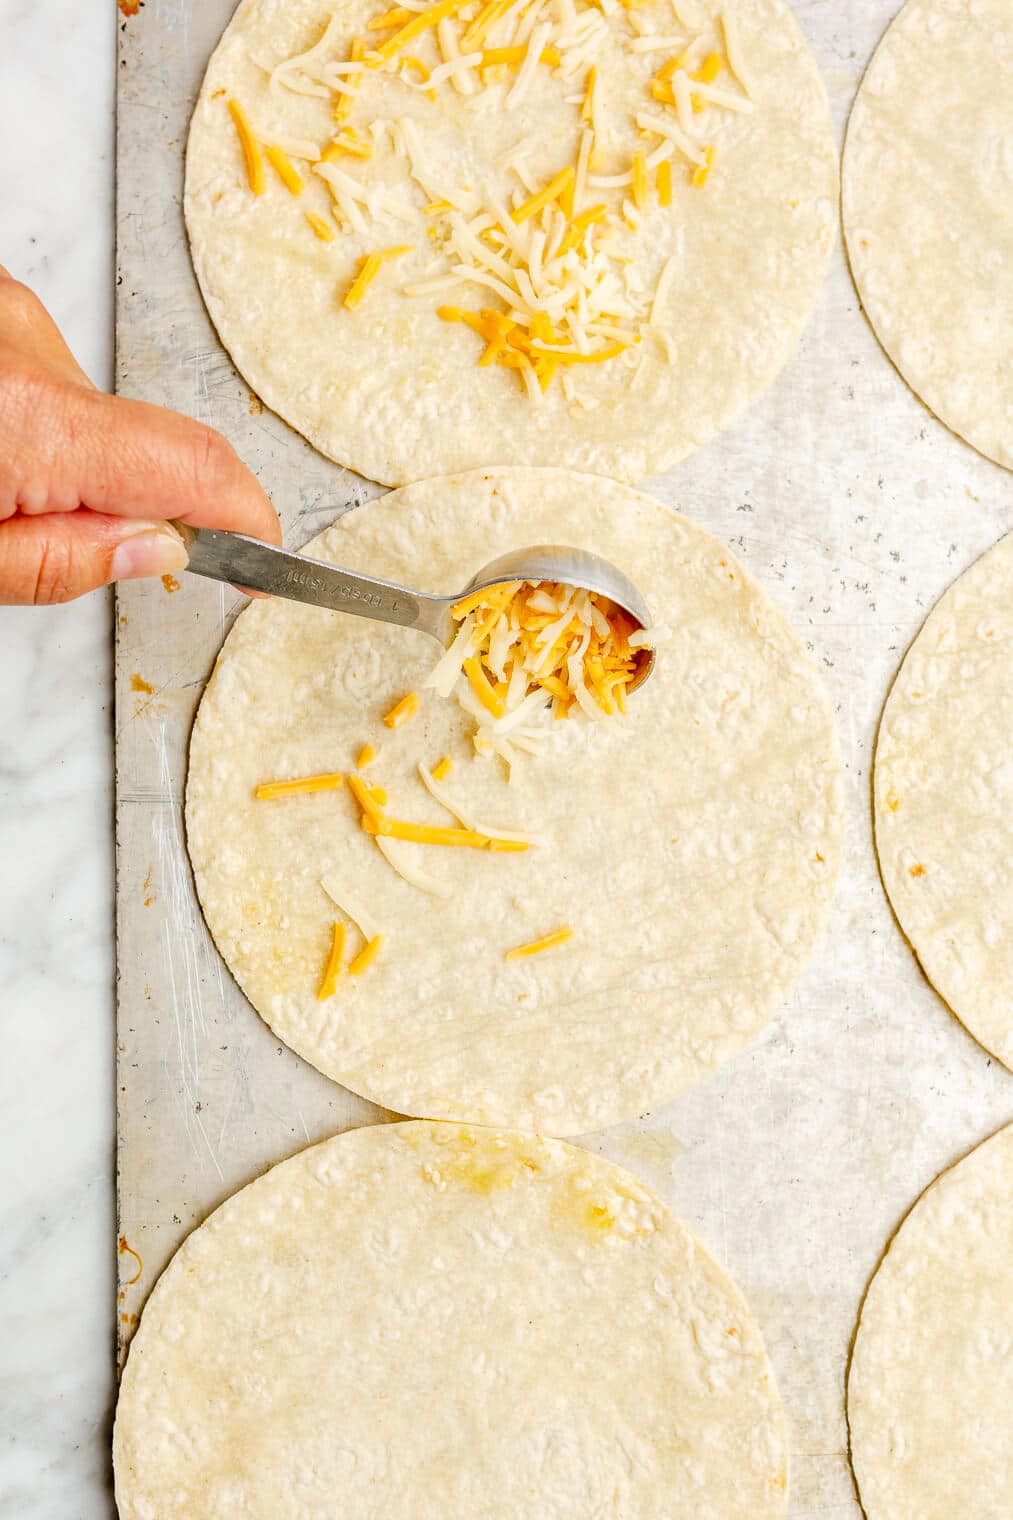 Hand scooping a tablespoon of shredded cheese onto a corn tortilla. The corn tortilla is on a metal sheet pan with 5 other corn tortillas.